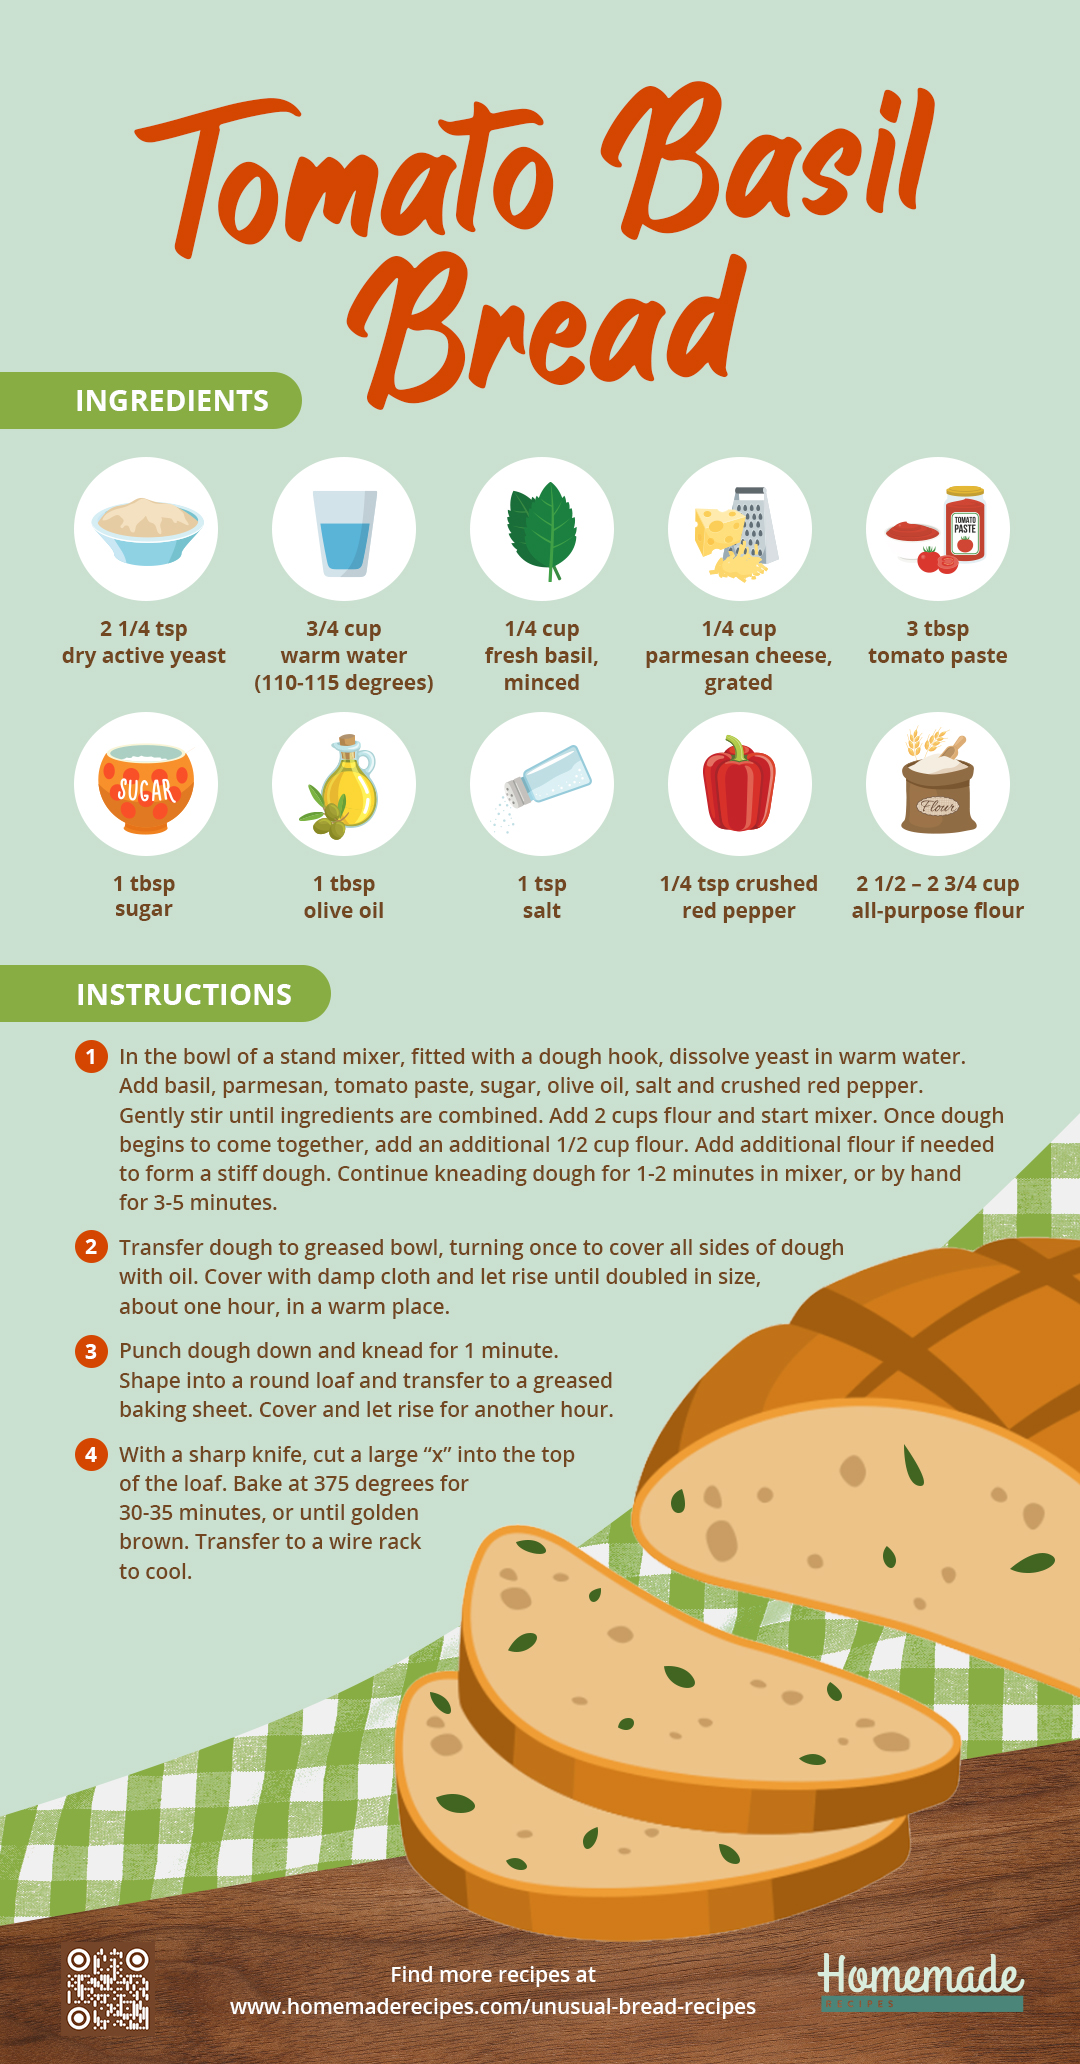 Tomato Basil Bread | Unusual Bread Recipes You Have To Try [INFOGRAPHIC]